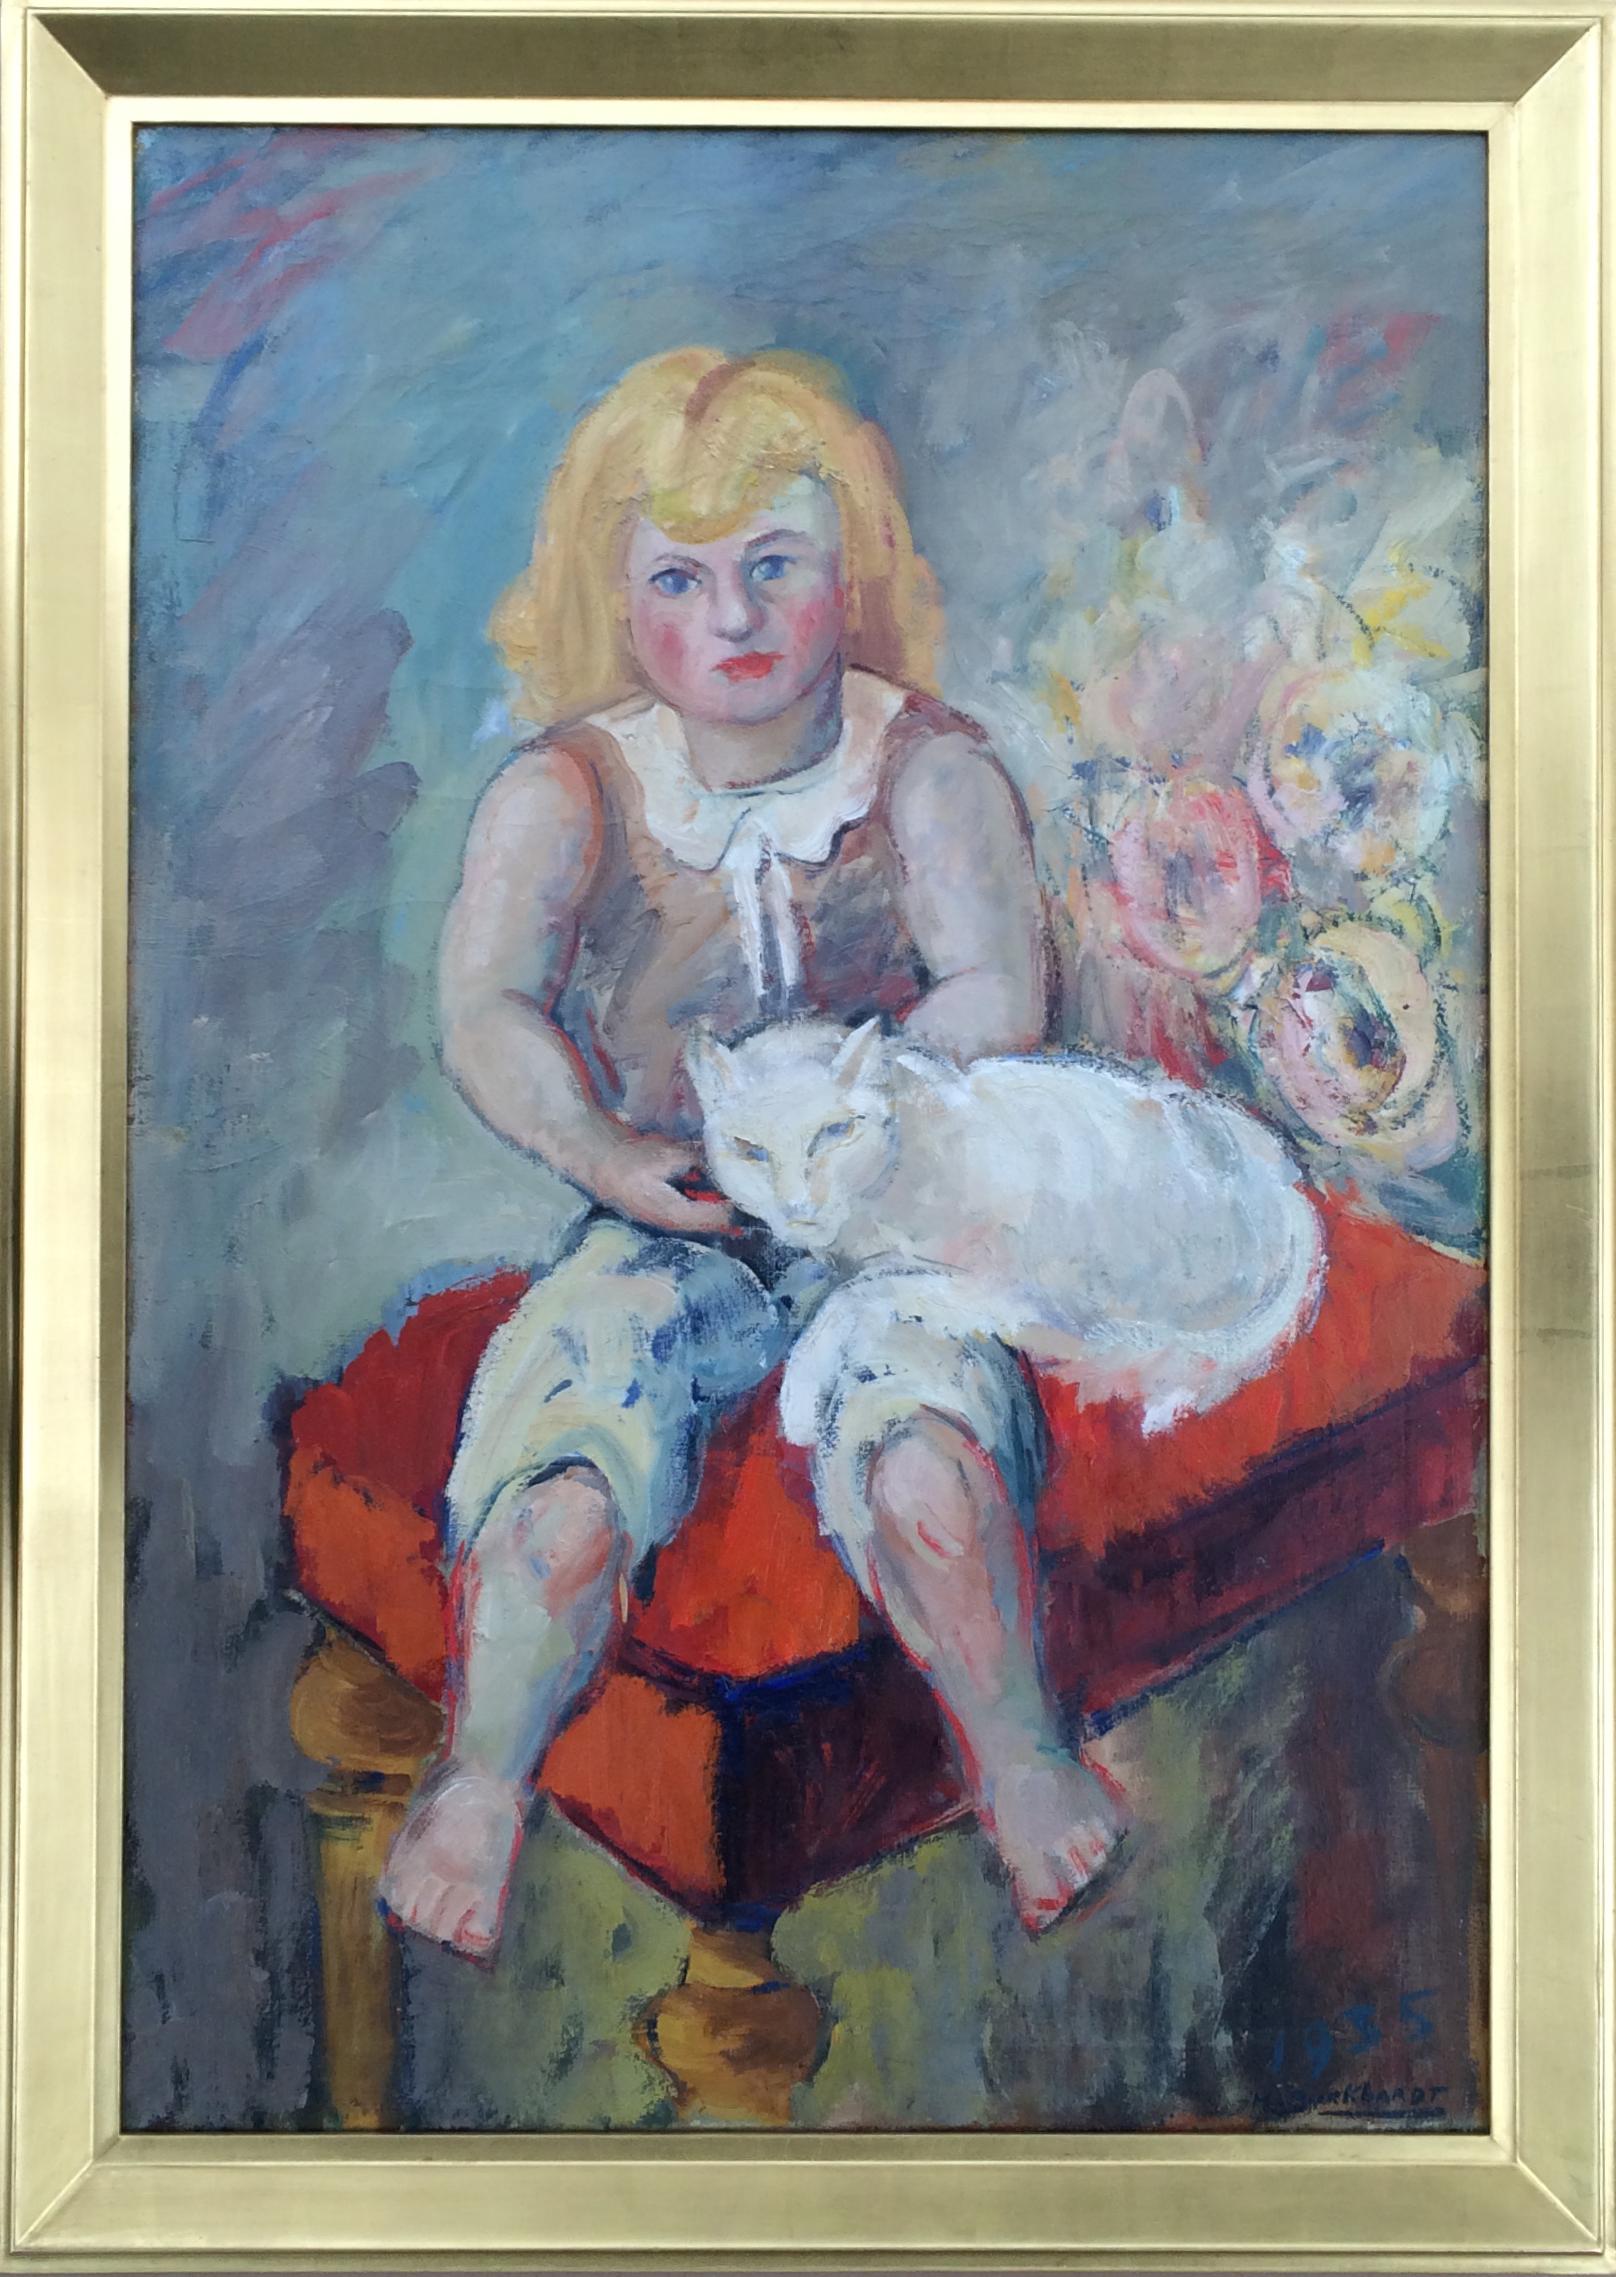 Girl with Cat (1935)
Oil on canvas
38" x 26"
42 ½" x 30 ½" x 3 ½" framed
Signed and dated "1935 H Burkhardt" lower right. Signed, dated and inscribed verso.

About this artist: Hans Burkhardt was born December 20th, 1904 in Basel Switzerland. His